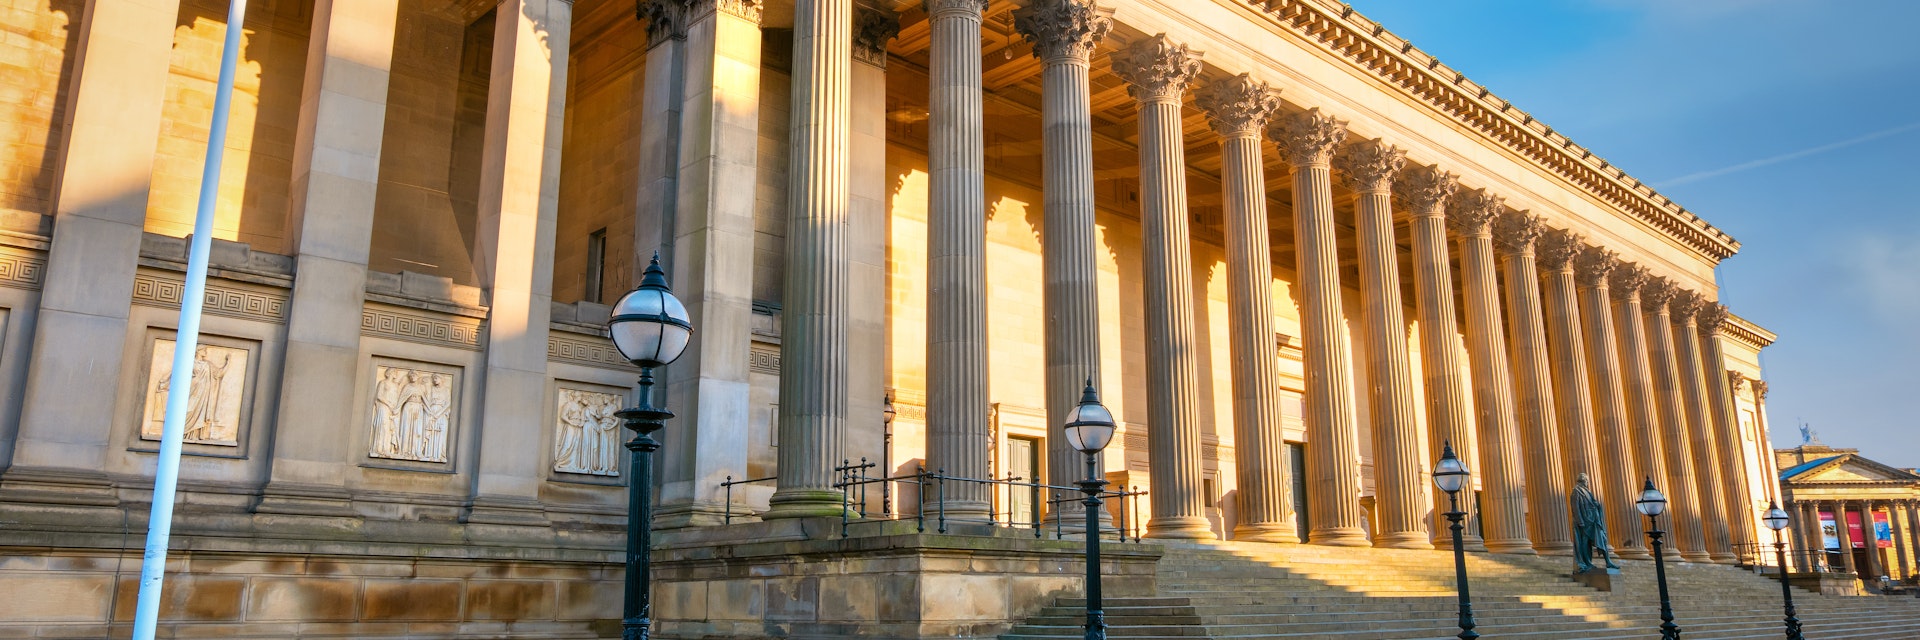 Liverpool, UK - May 17 2018: St George's Hall designed by Harvey Lonsdale Elmes, contains concert halls and law courts,  opened in 1854 and it's on the list of National Heritage List for England; Shutterstock ID 1384344167; full: digital; gl: 65050; netsuite: poi; your: Barbara Di Castro
1384344167